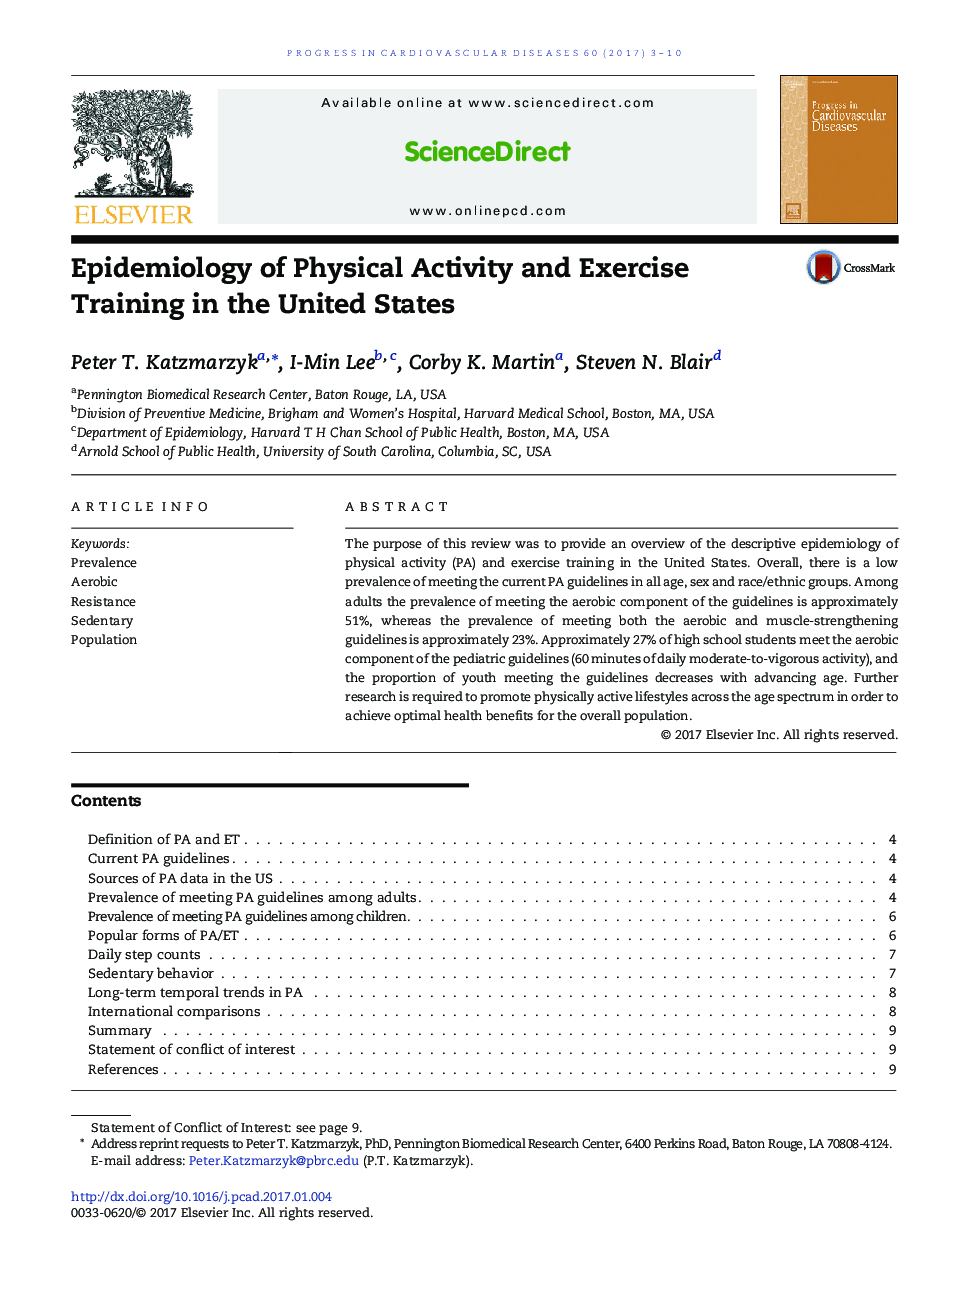 Epidemiology of Physical Activity and Exercise Training in the United States